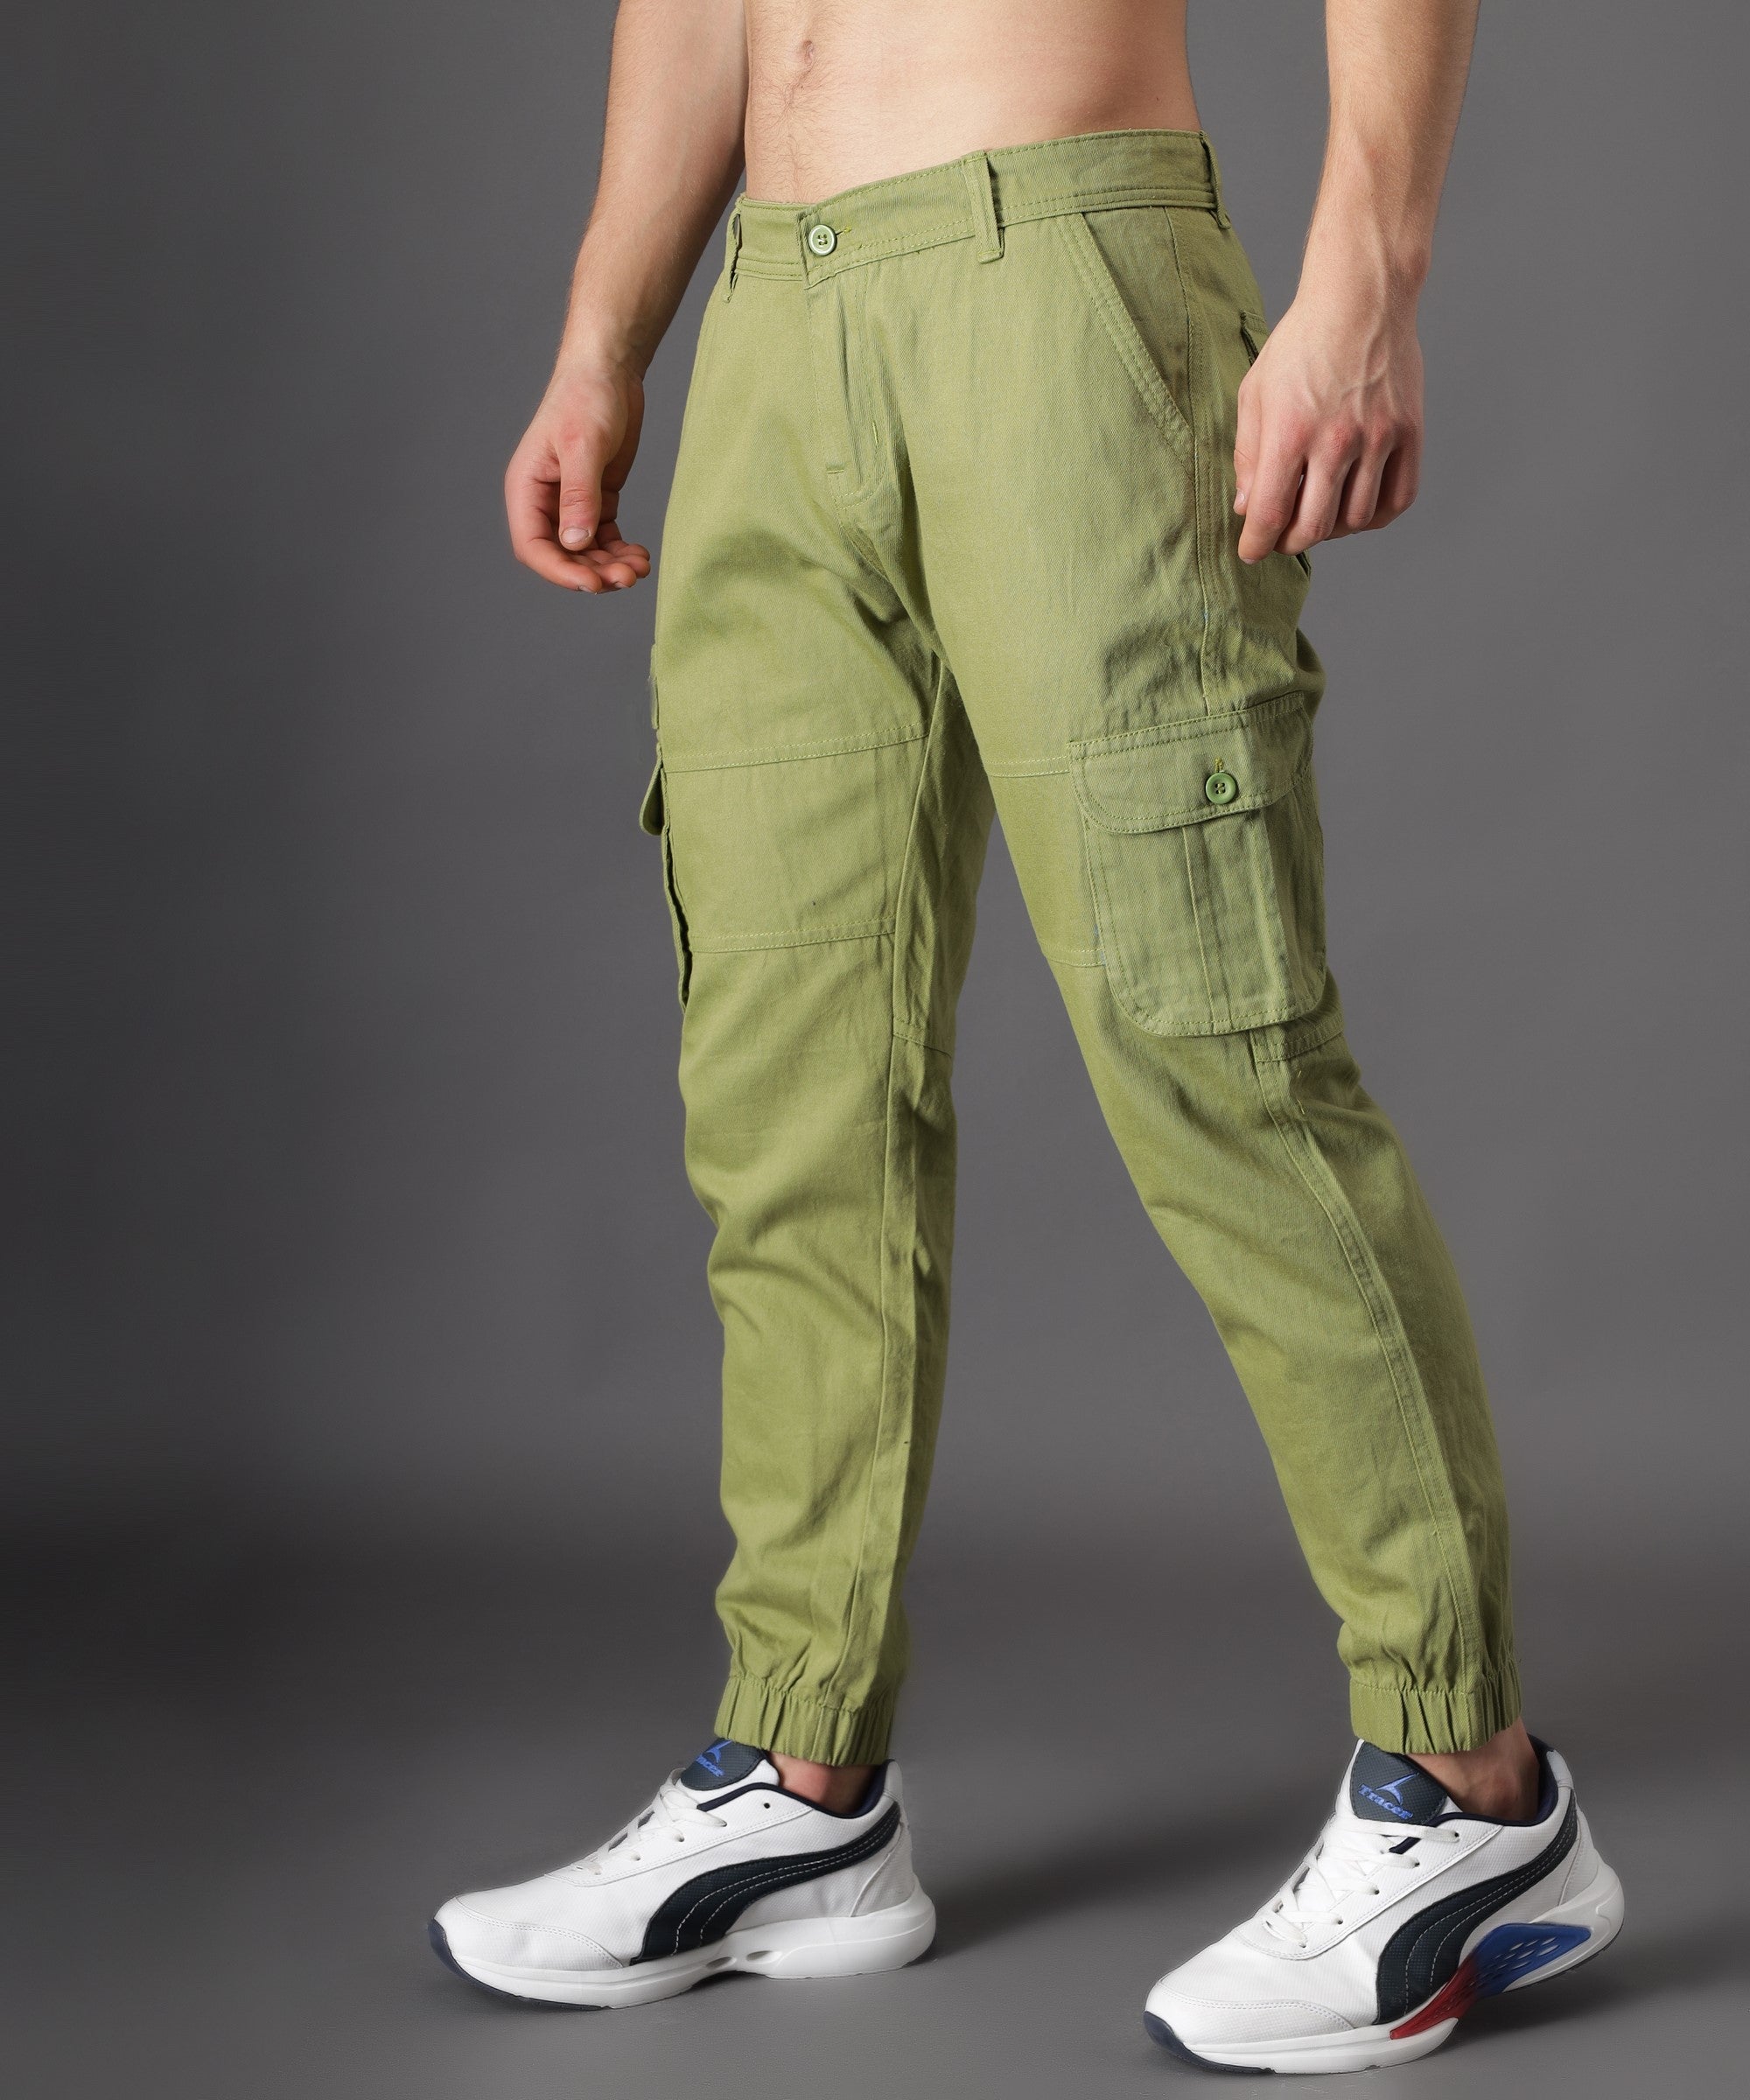 Army Green Cargo Pant For Sale – GINGTTO